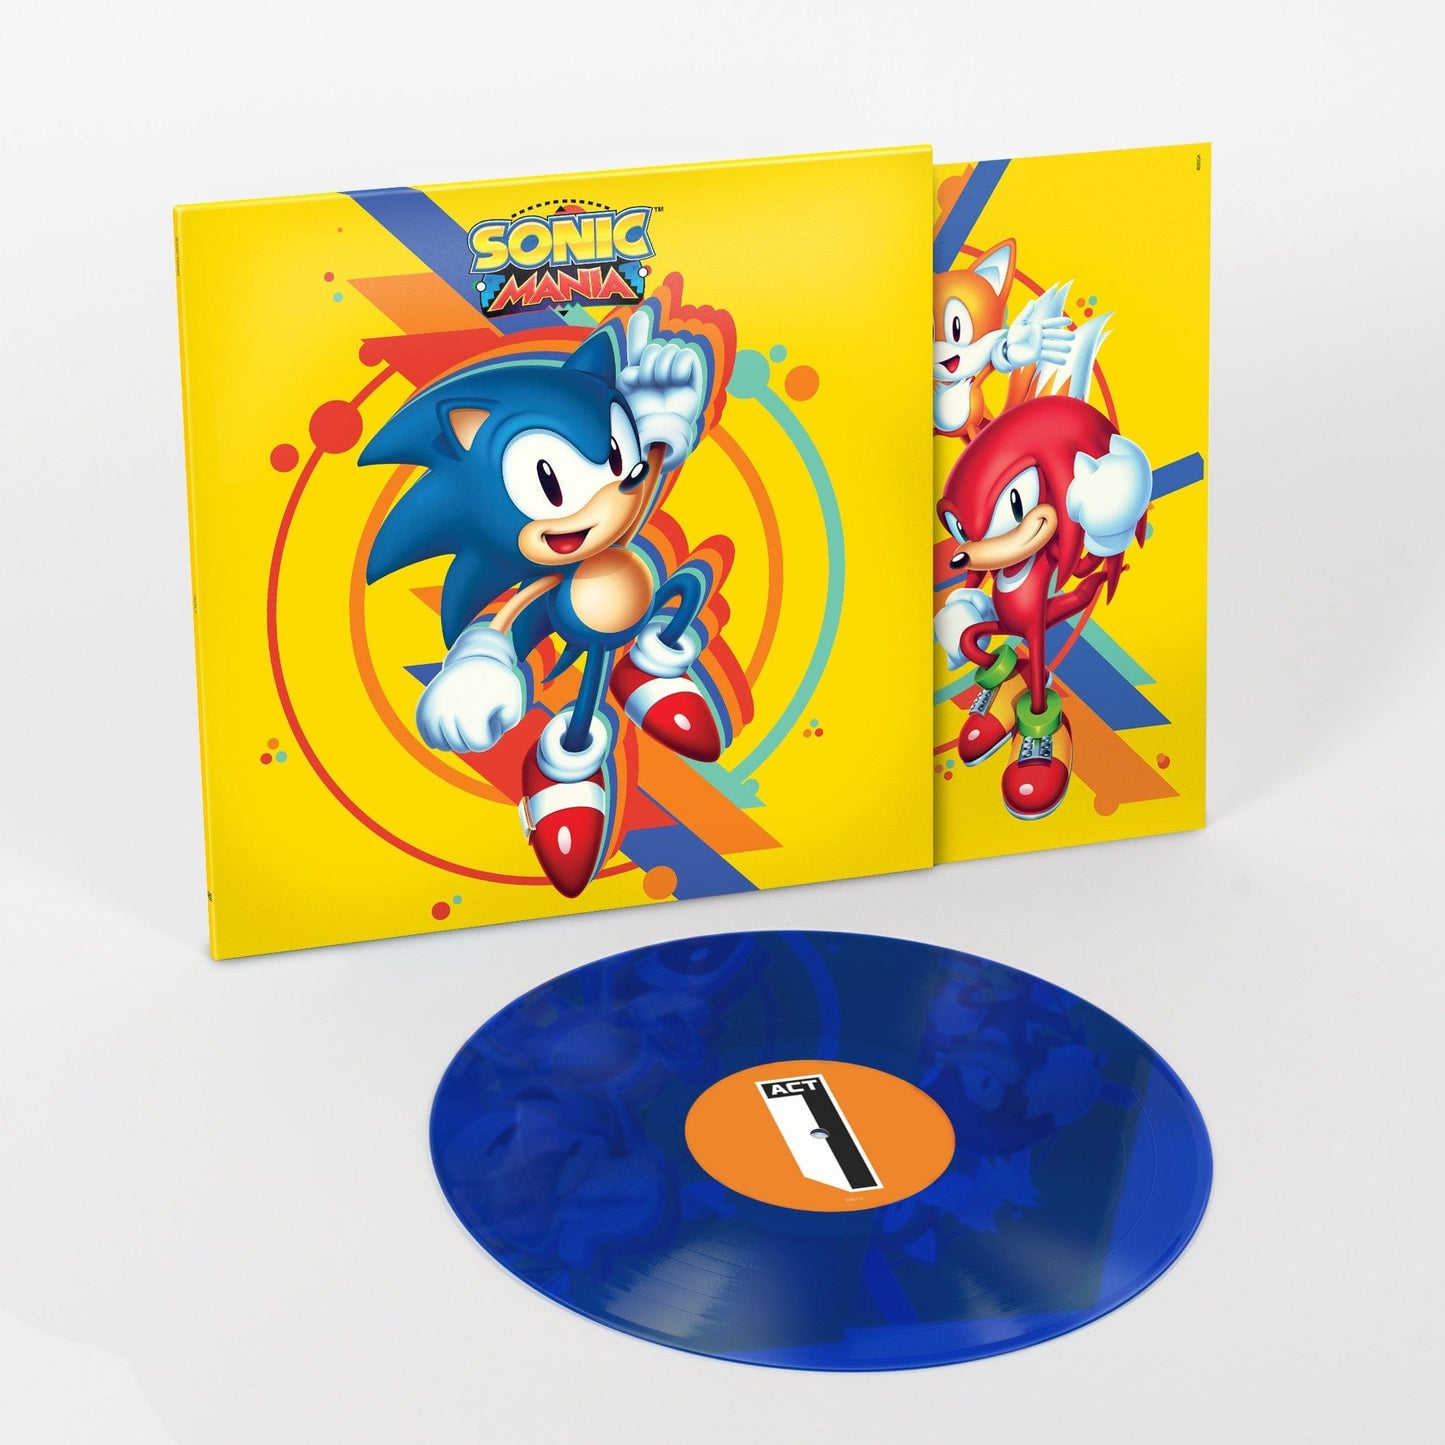 Sonic Mania (Original Video Game Soundtrack) - Tee Lopes | Helix Sounds